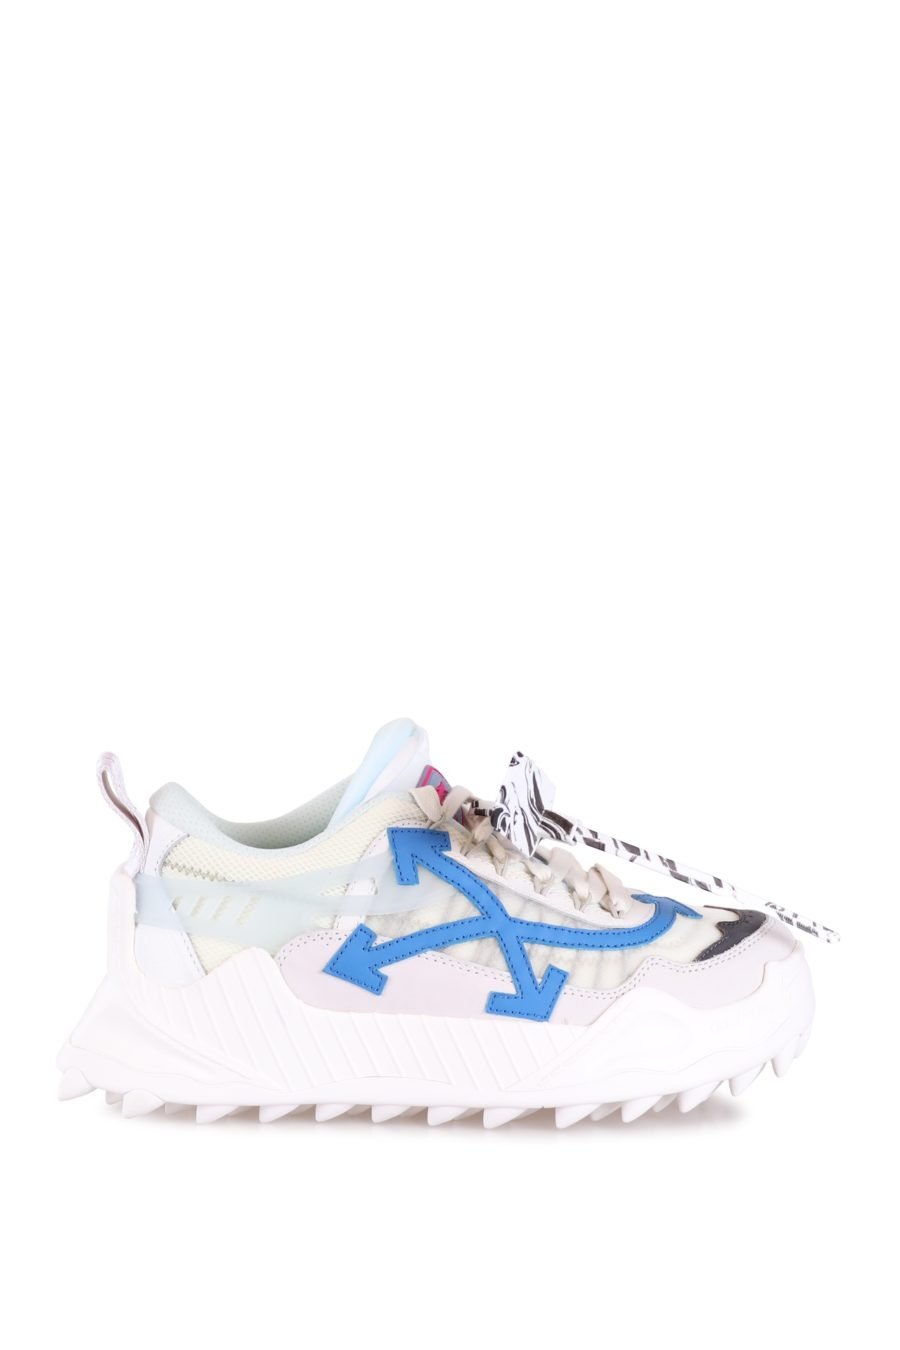 Trainers Off-White "ODSY-1000" white with blue arrows - ccb5215e5ba2d8a6f17ed72936af7b948e6b713f